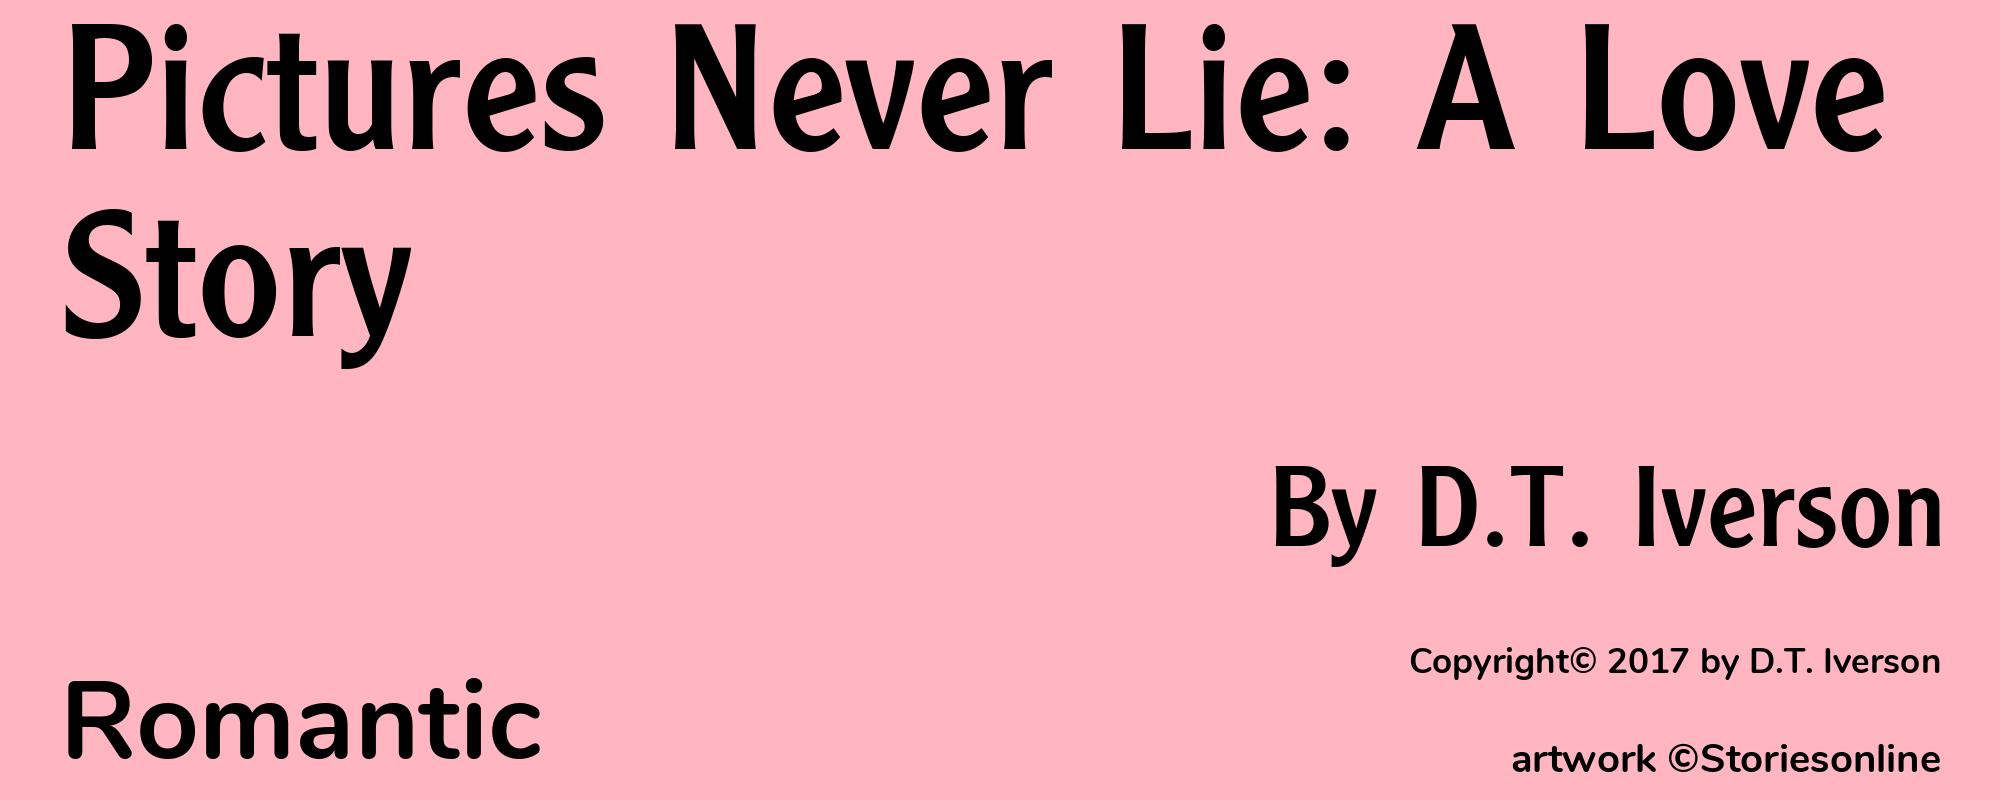 Pictures Never Lie: A Love Story - Cover